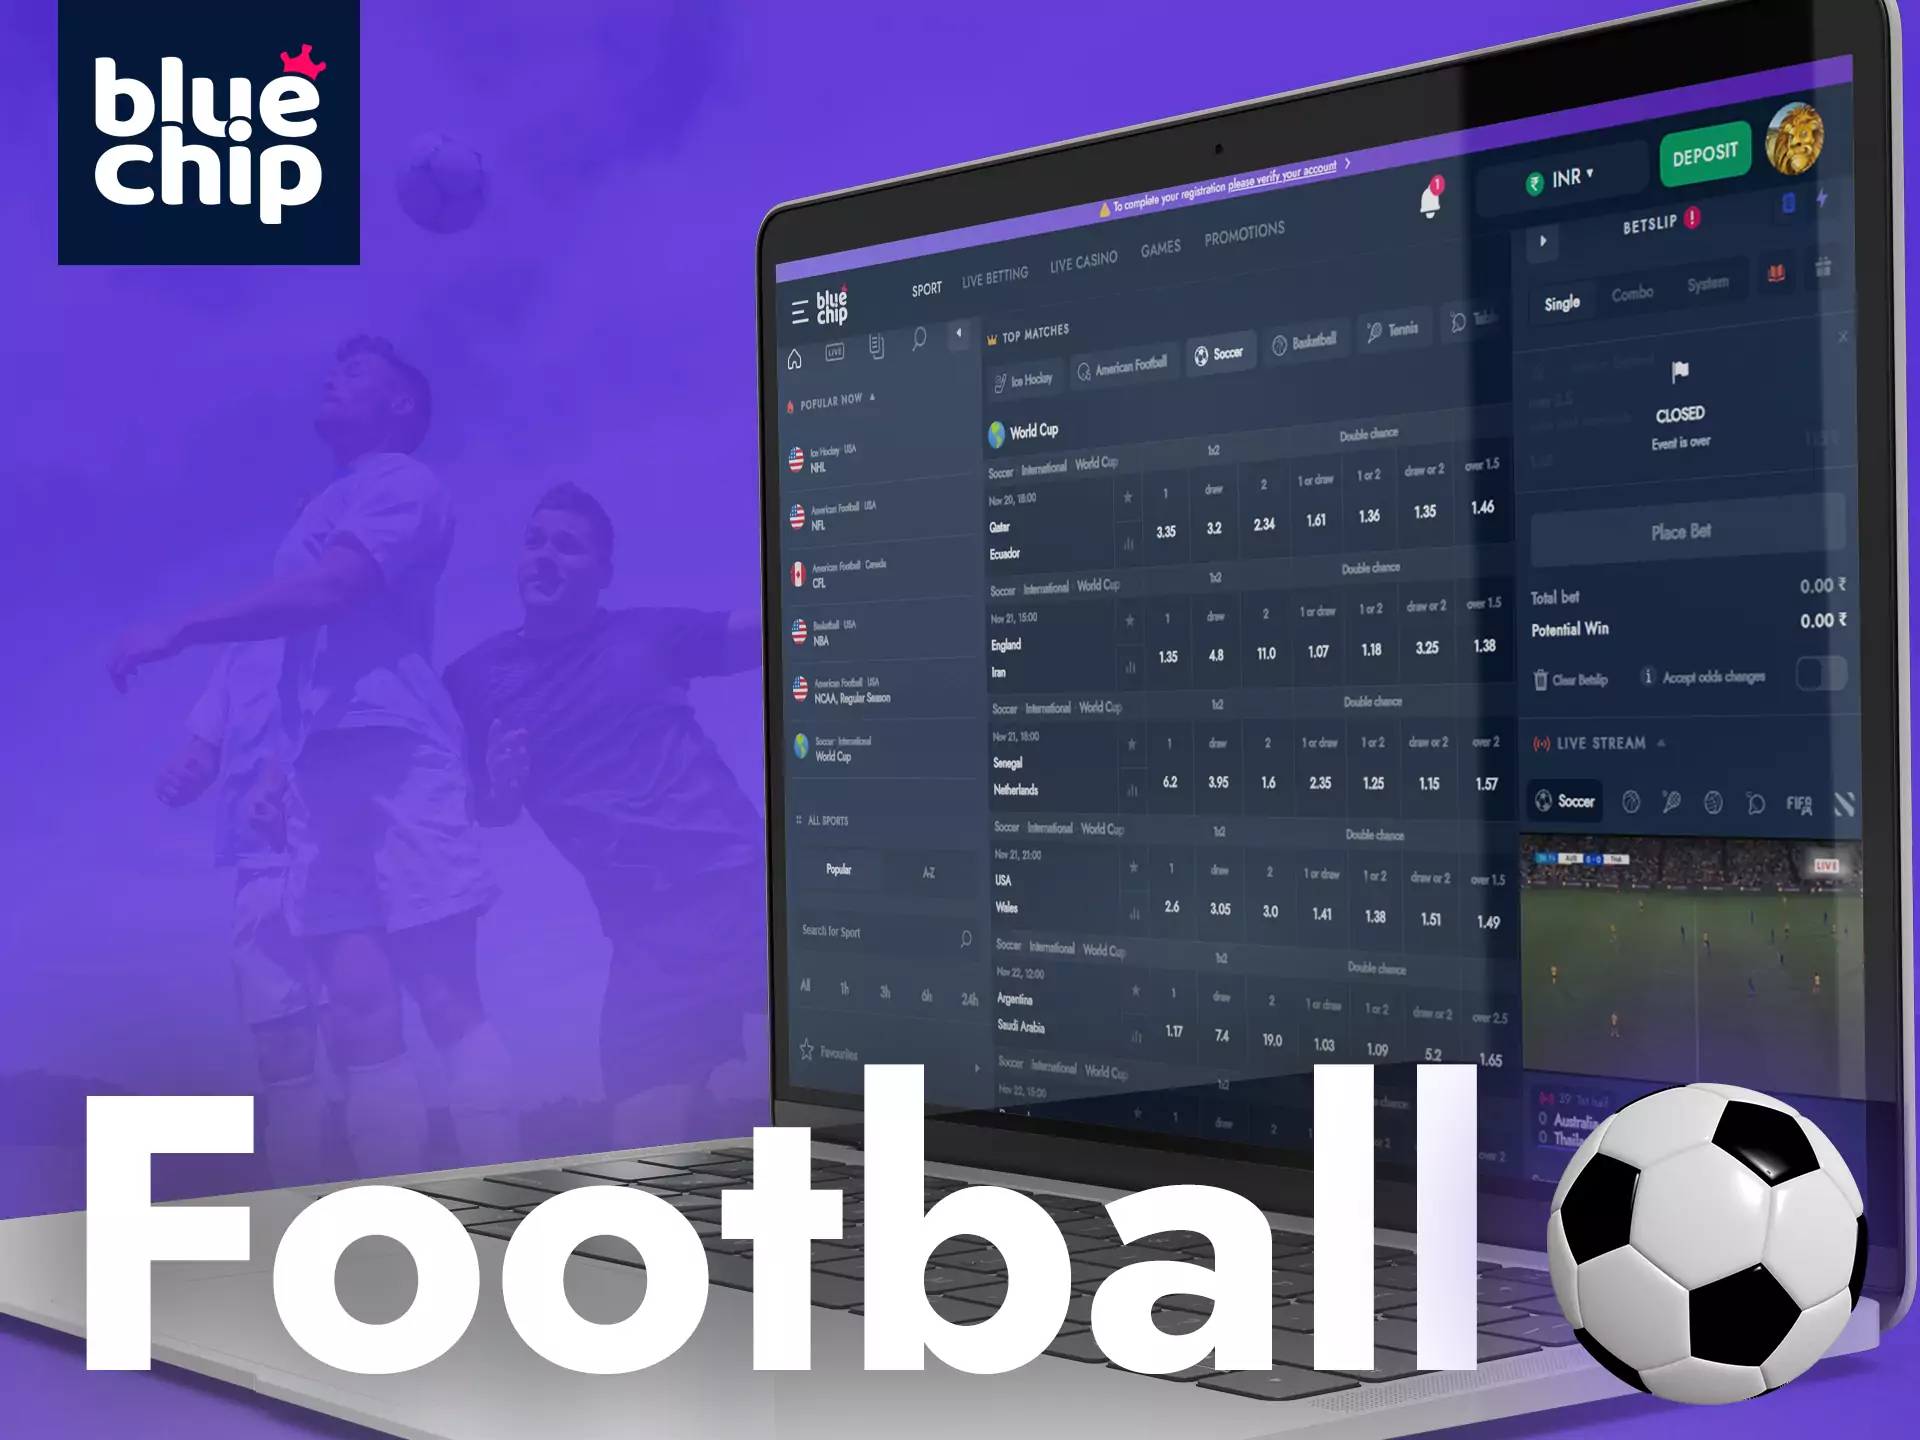 On Bluechip, you find many football matches available for betting.